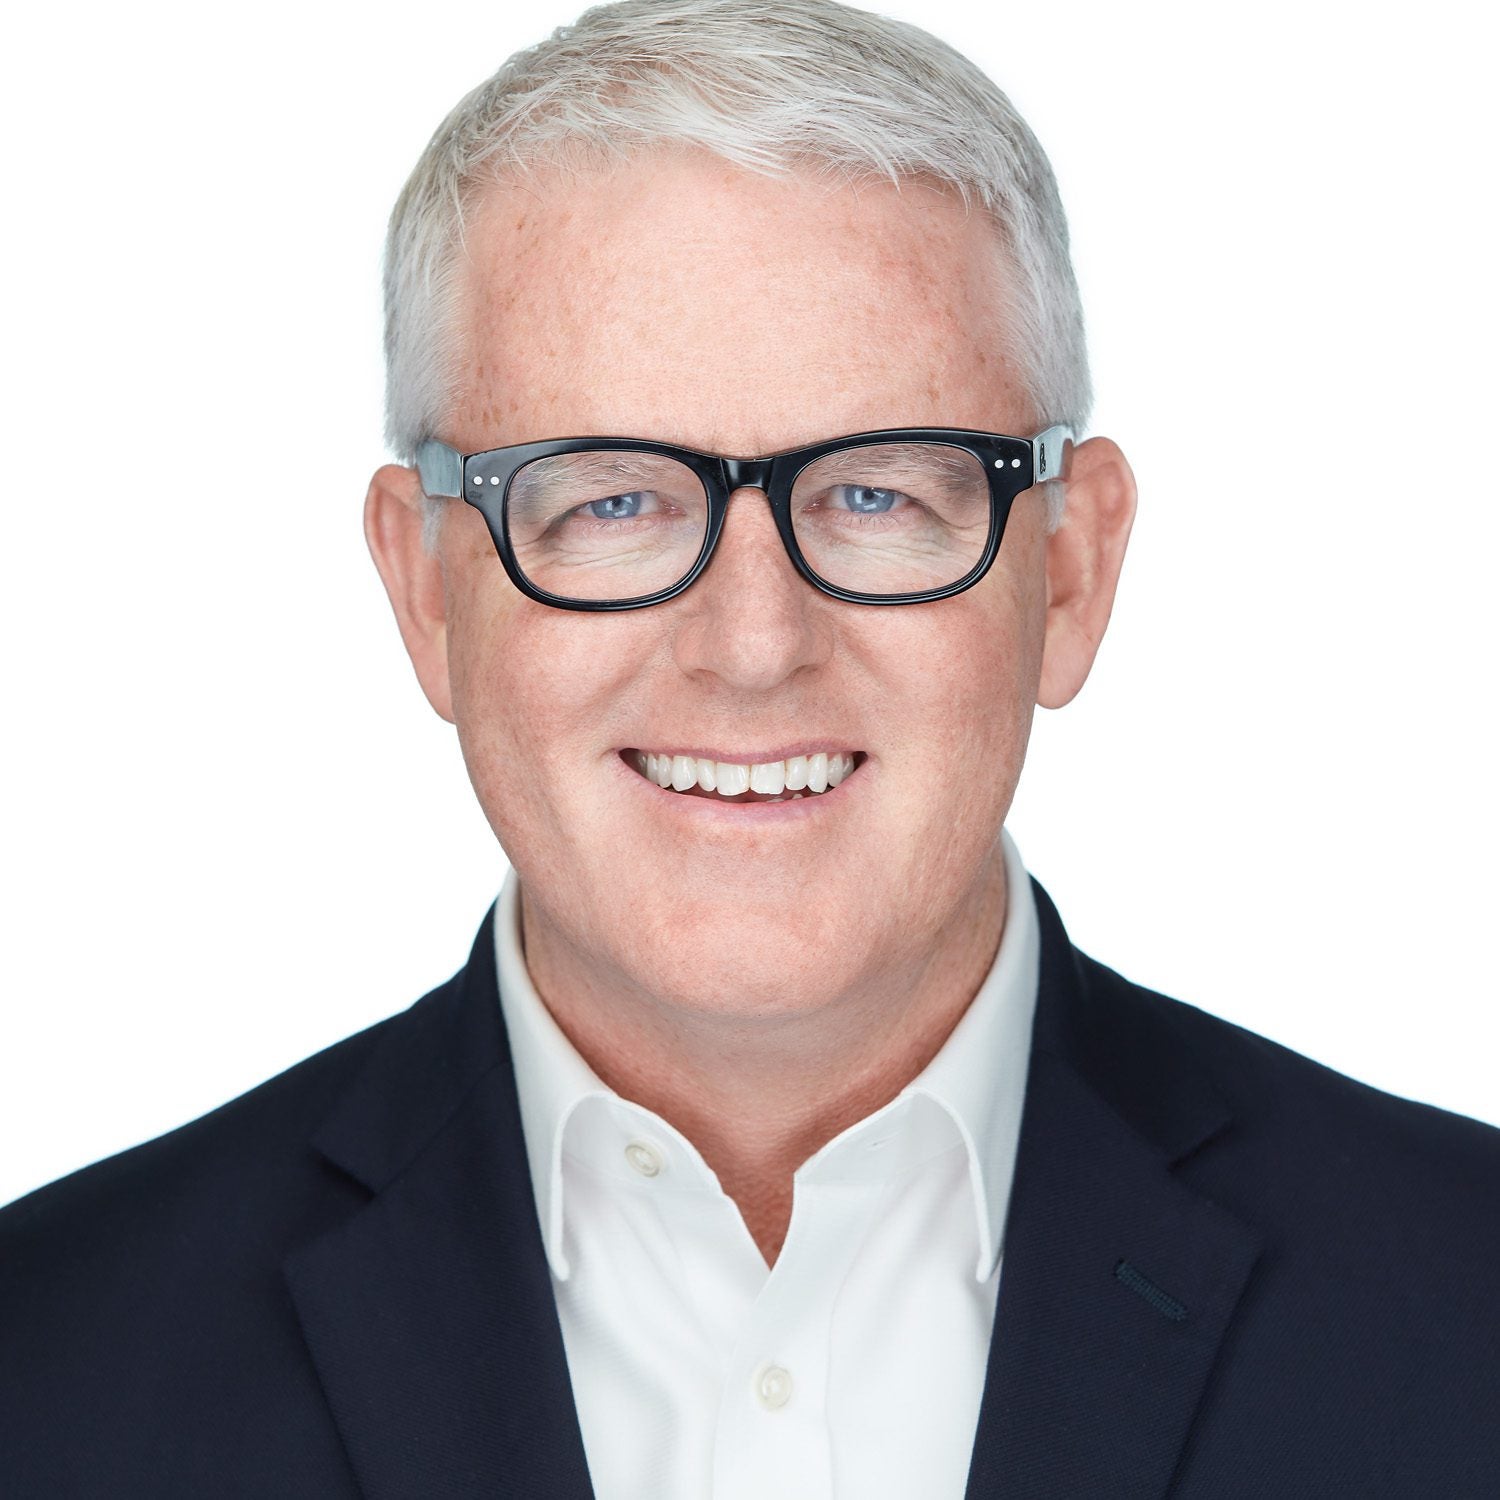 SPS Commerce Senior Vice President and Chief Marketing Officer, Mark O'Leary